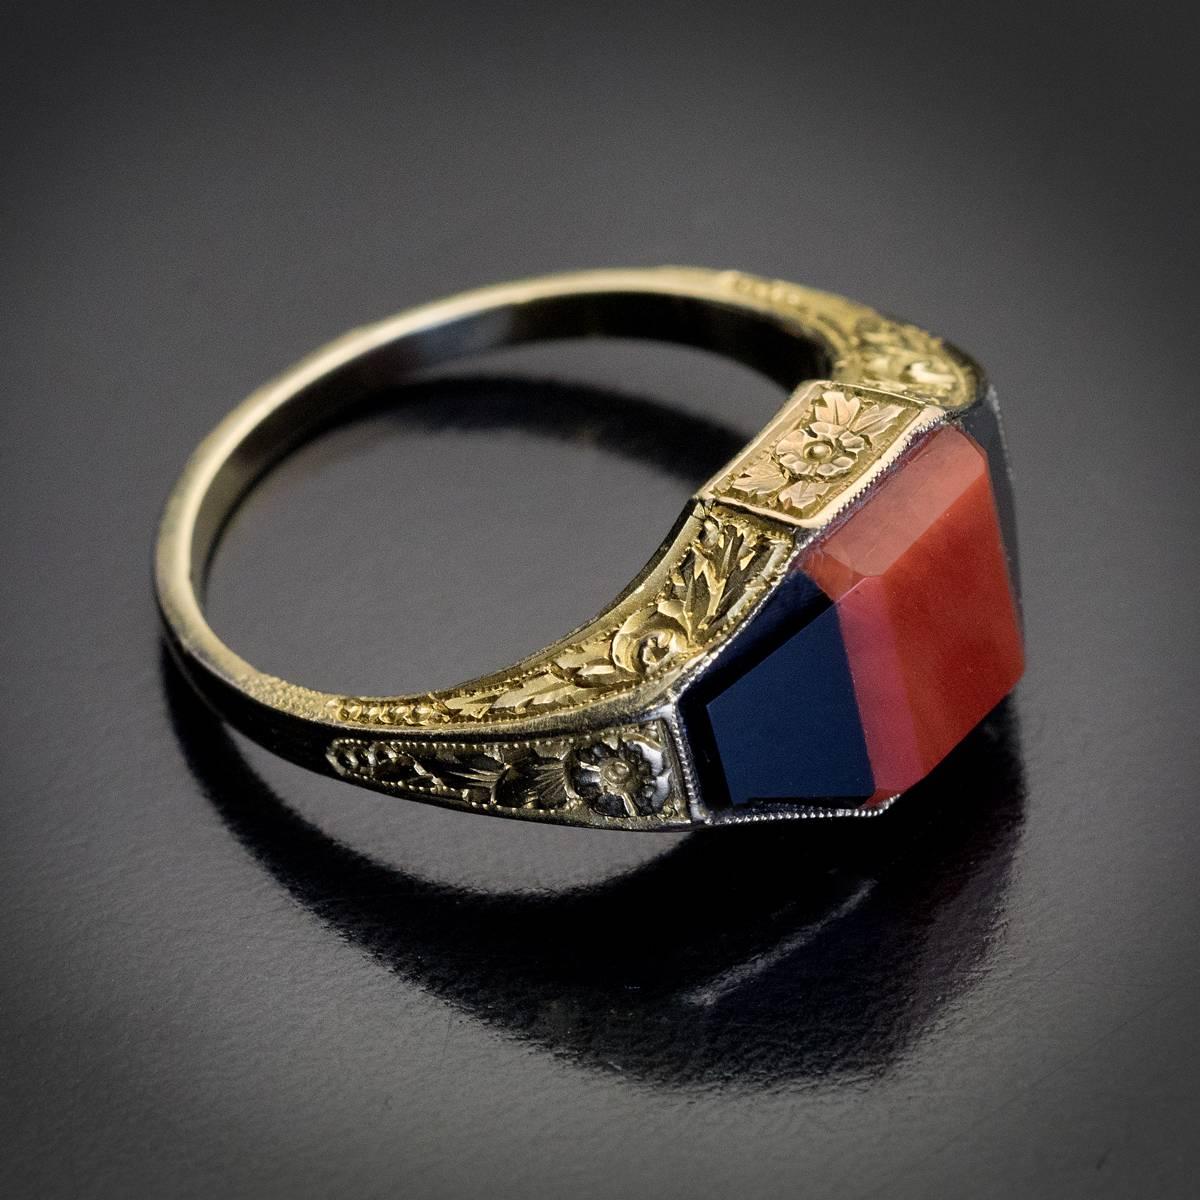 Austria, Vienna, circa 1930

A vintage yellow 14K gold unisex ring with finely hand-carved floral designs is centered with a rectangular natural coral flanked by two trapezoid shaped black onyxes (a variety of agate).

The ring is marked with